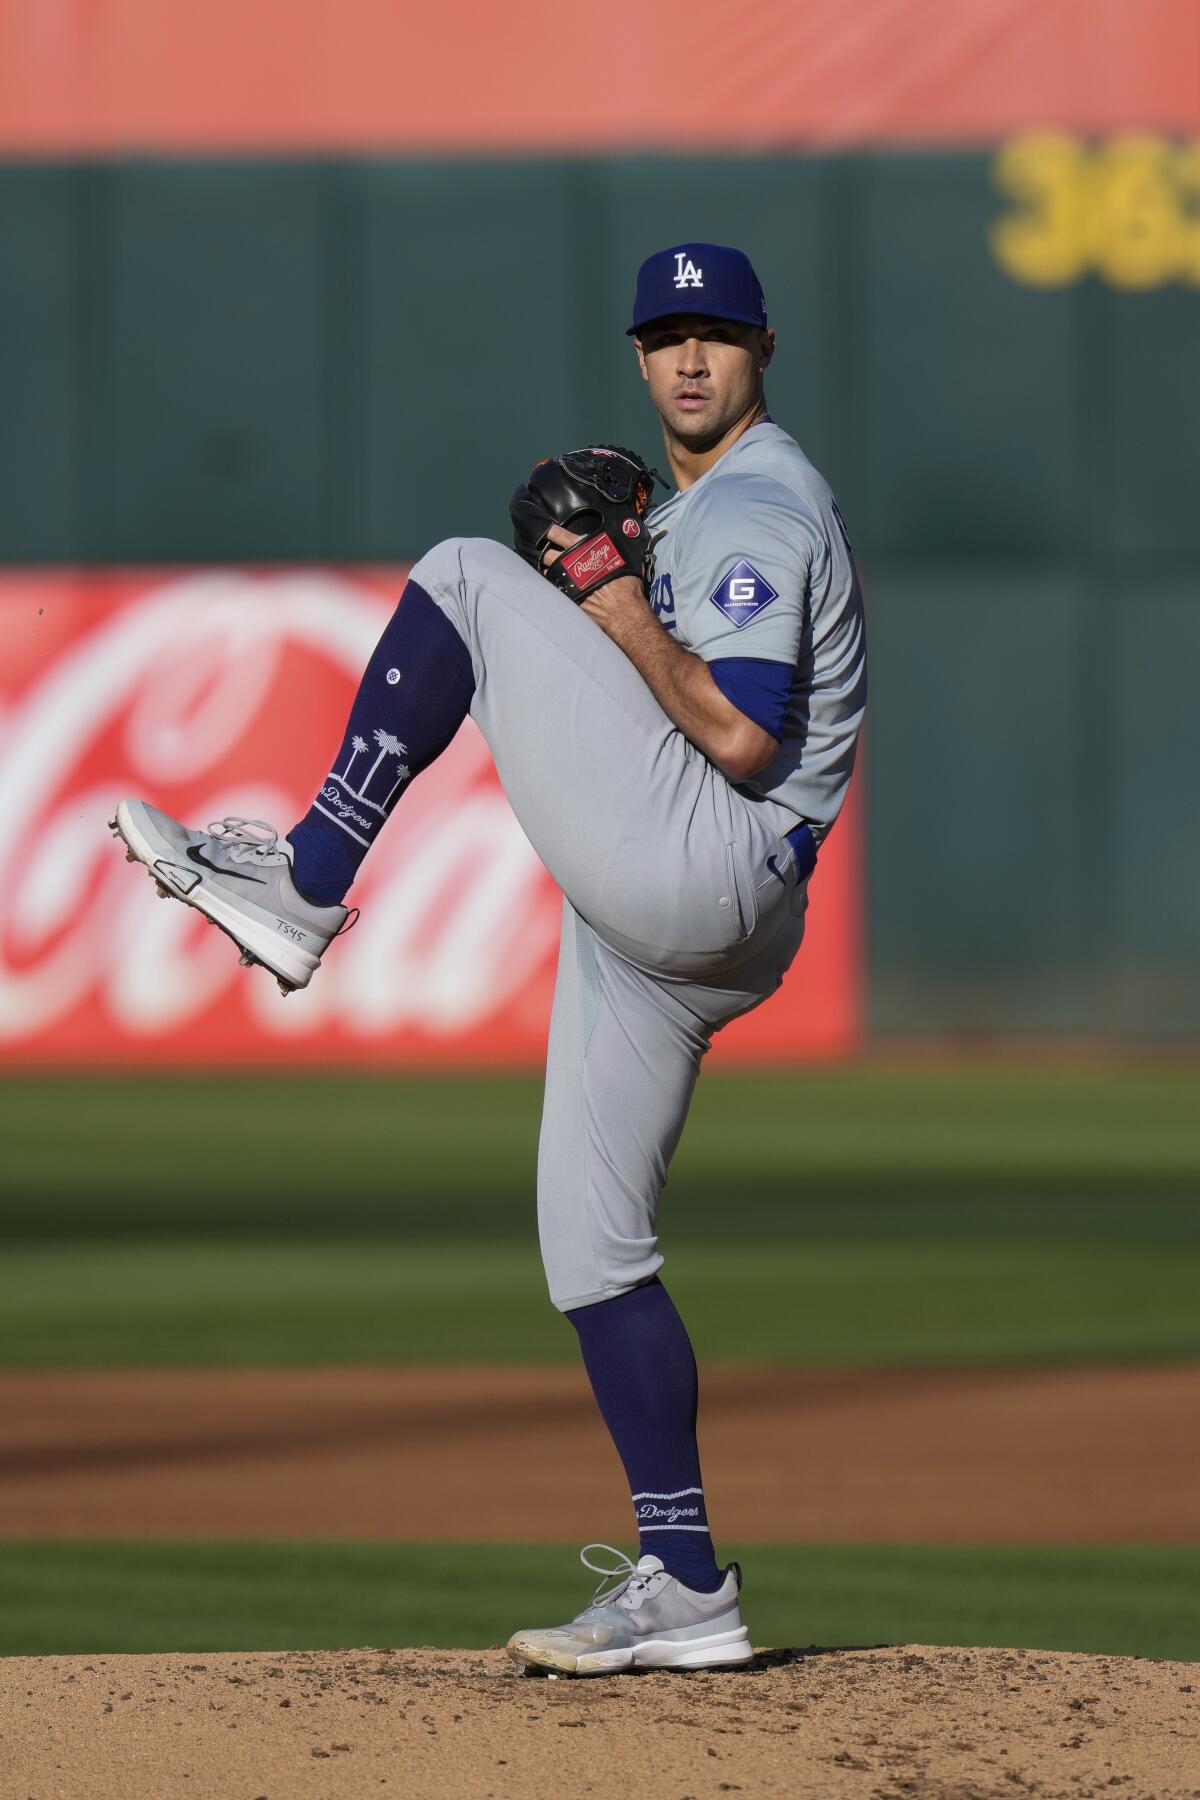 Dodgers pitcher Jack Flaherty on the mound in the first inning against Oakland on Saturday.